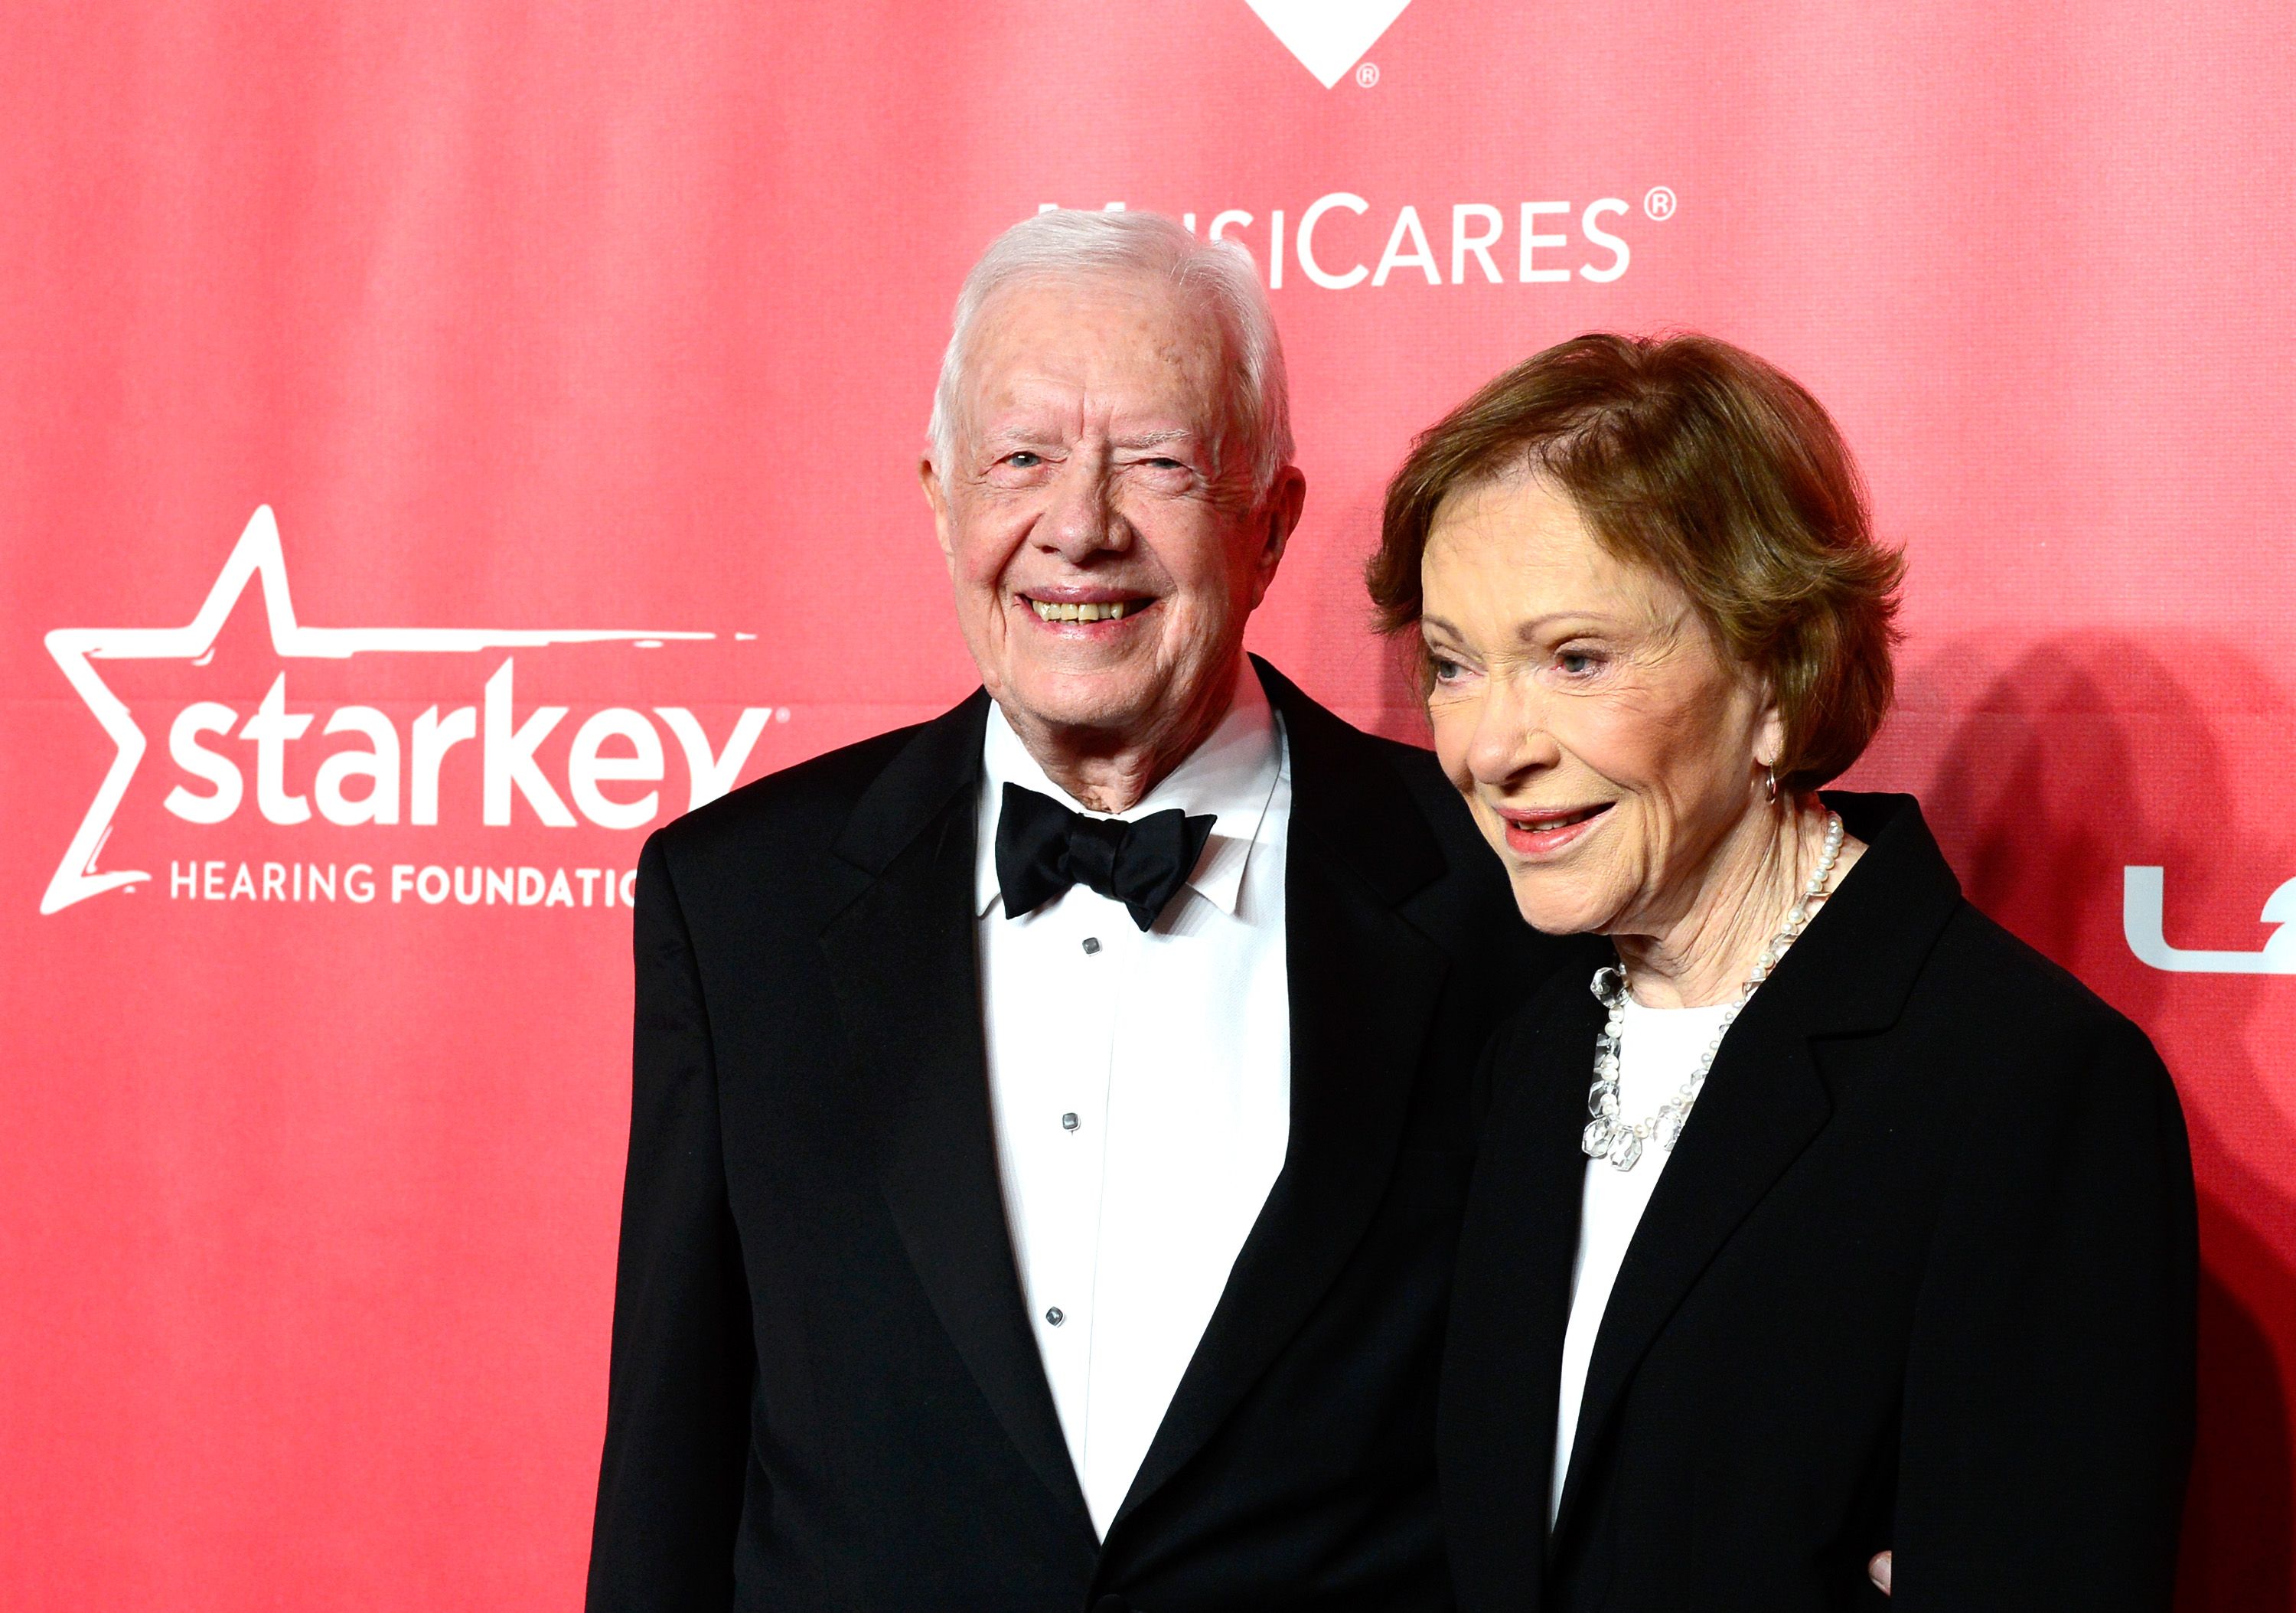  Former U.S. President Jimmy Carter and former First Lady Rosalynn Carter at the 25th anniversary MusiCares 2015 Person Of The Year Gala on February 6, 2015 | Photo: Getty Images